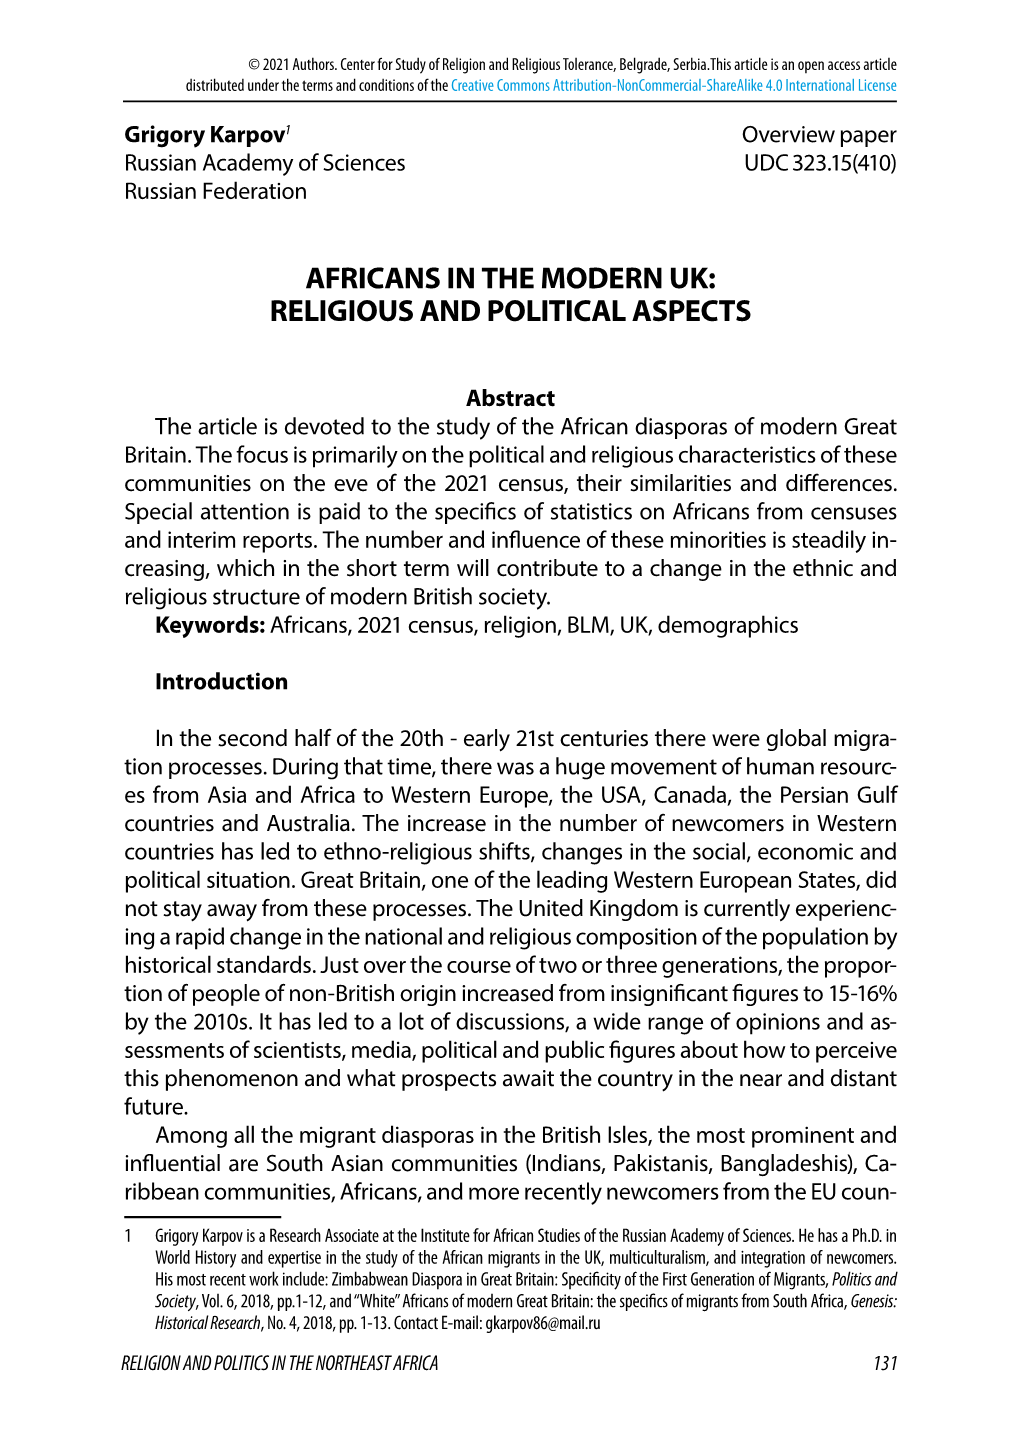 Africans in the Modern Uk: Religious and Political Aspects